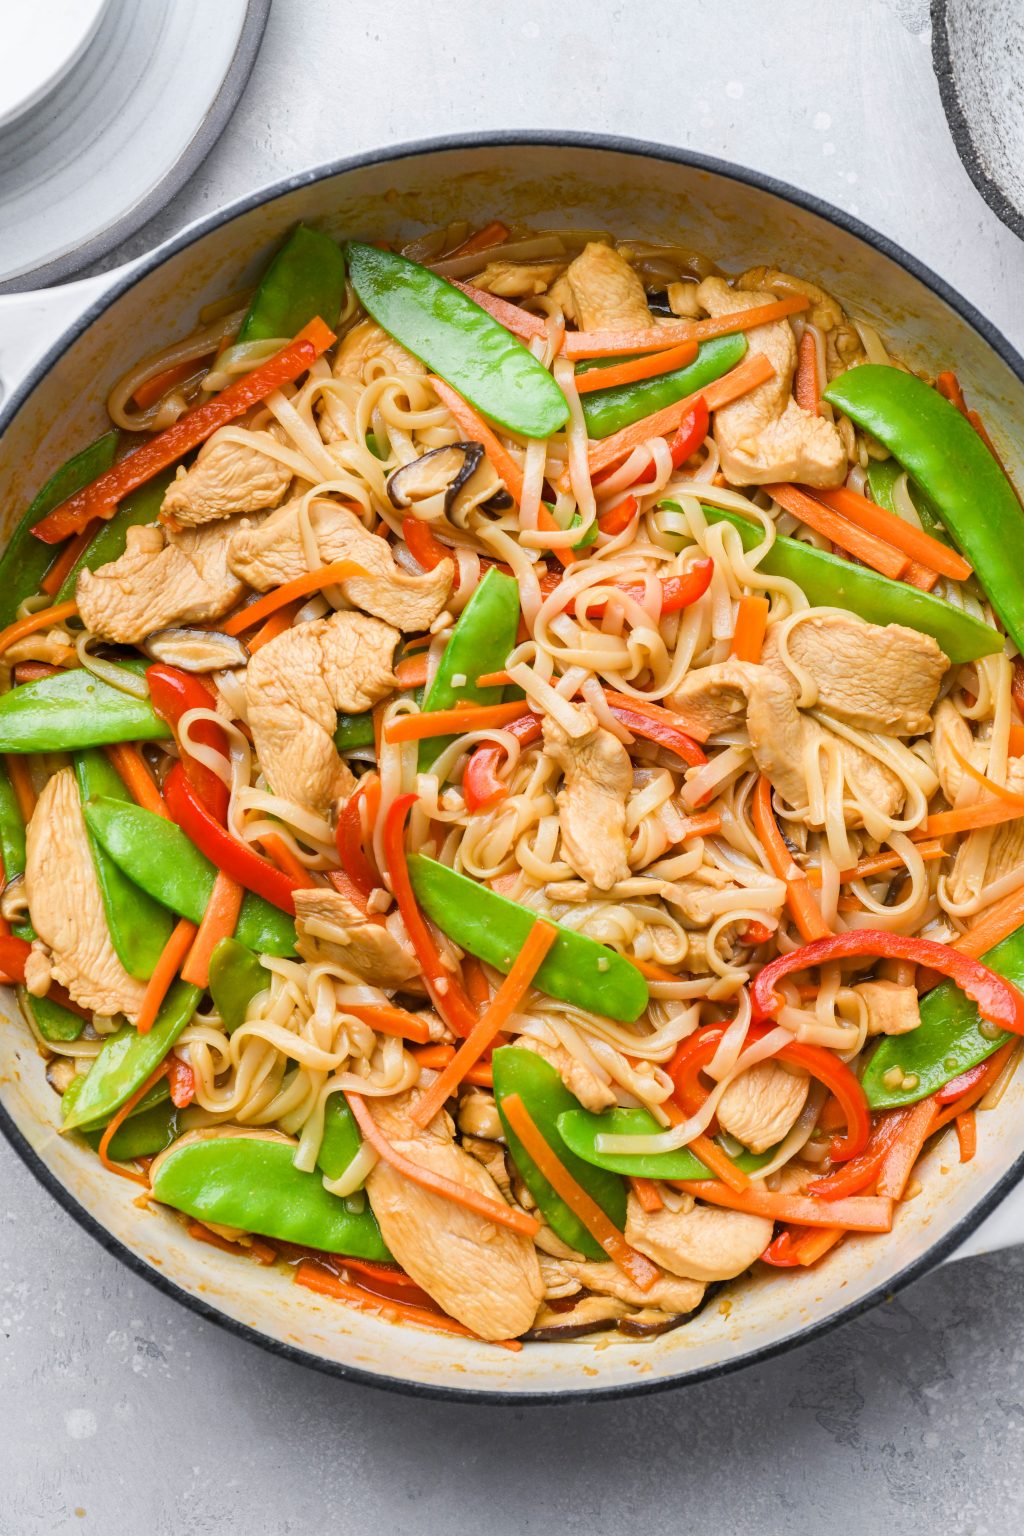 Loaded Rice Noodle Stir Fry with Crispy Garlic - Like Healthier Take Out!